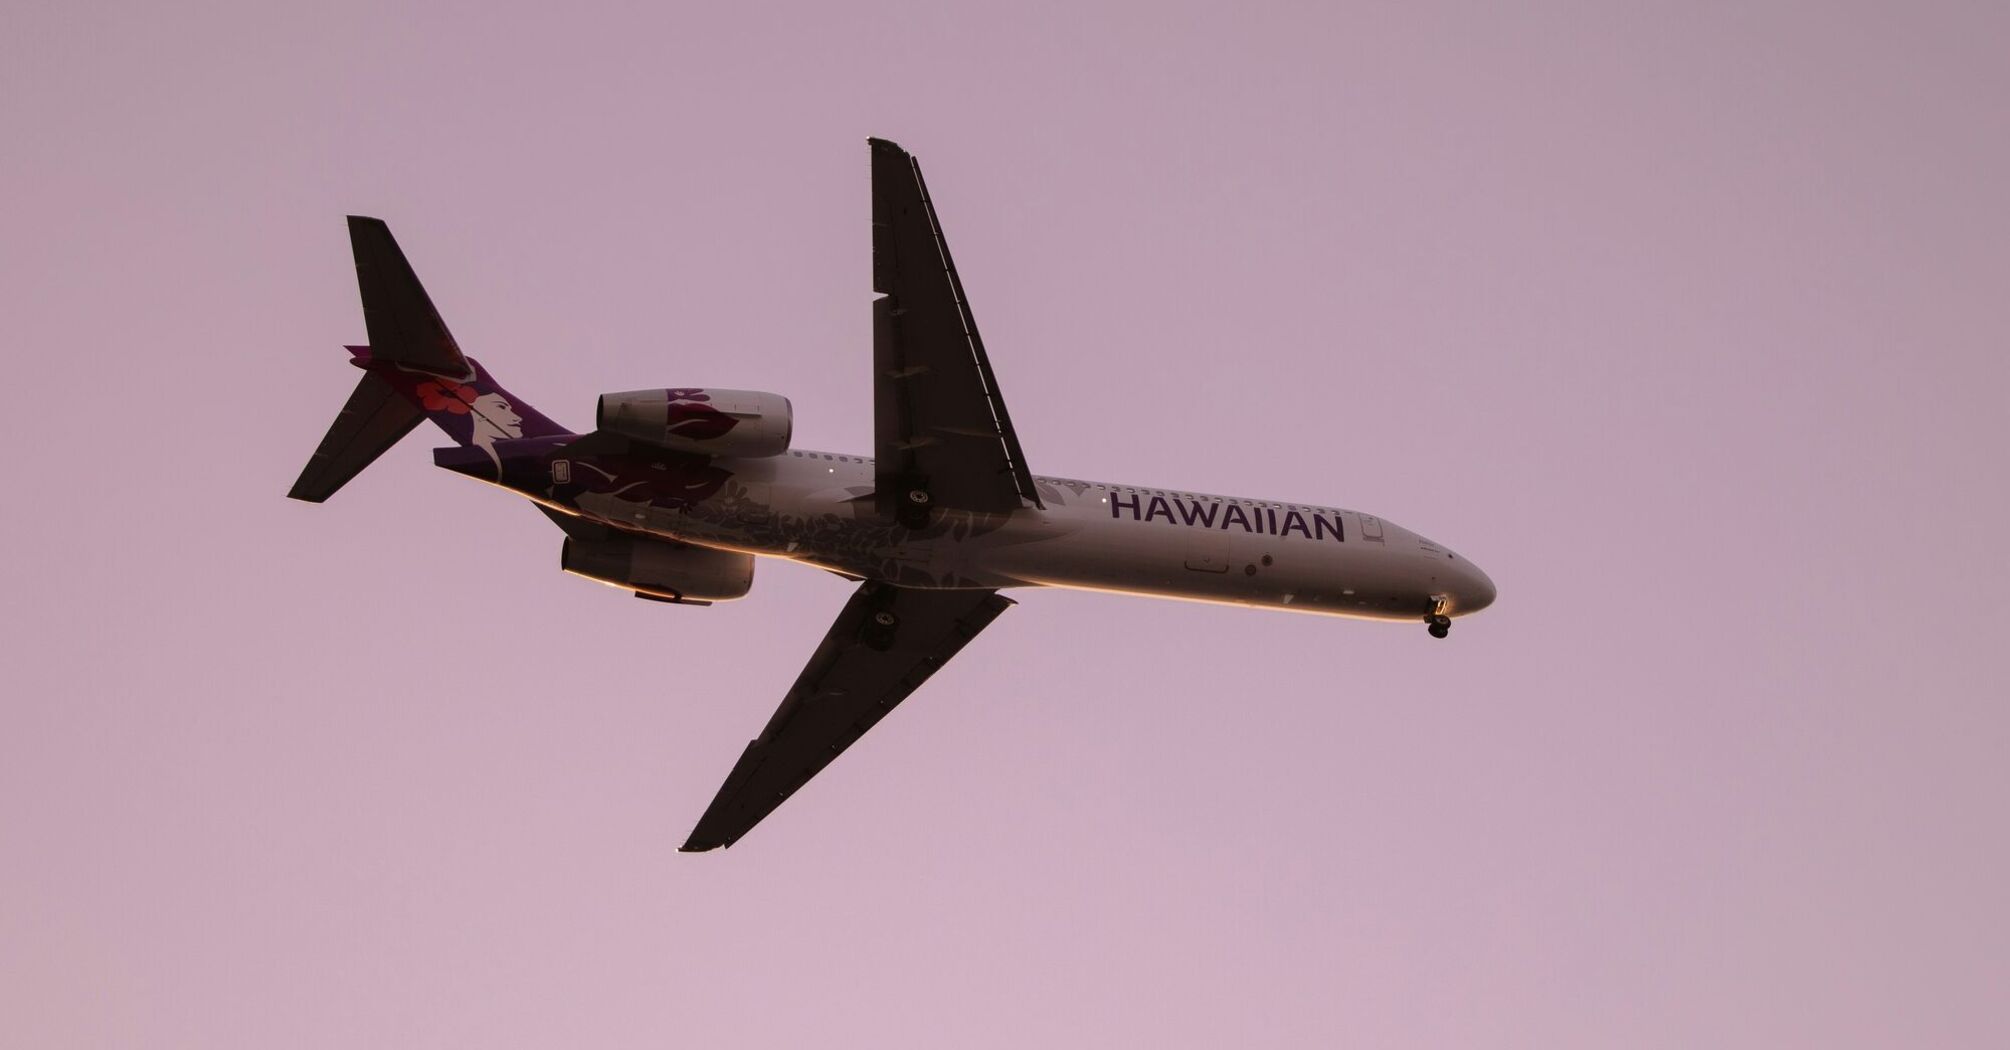 An airplane flying in the air with a pink sky background